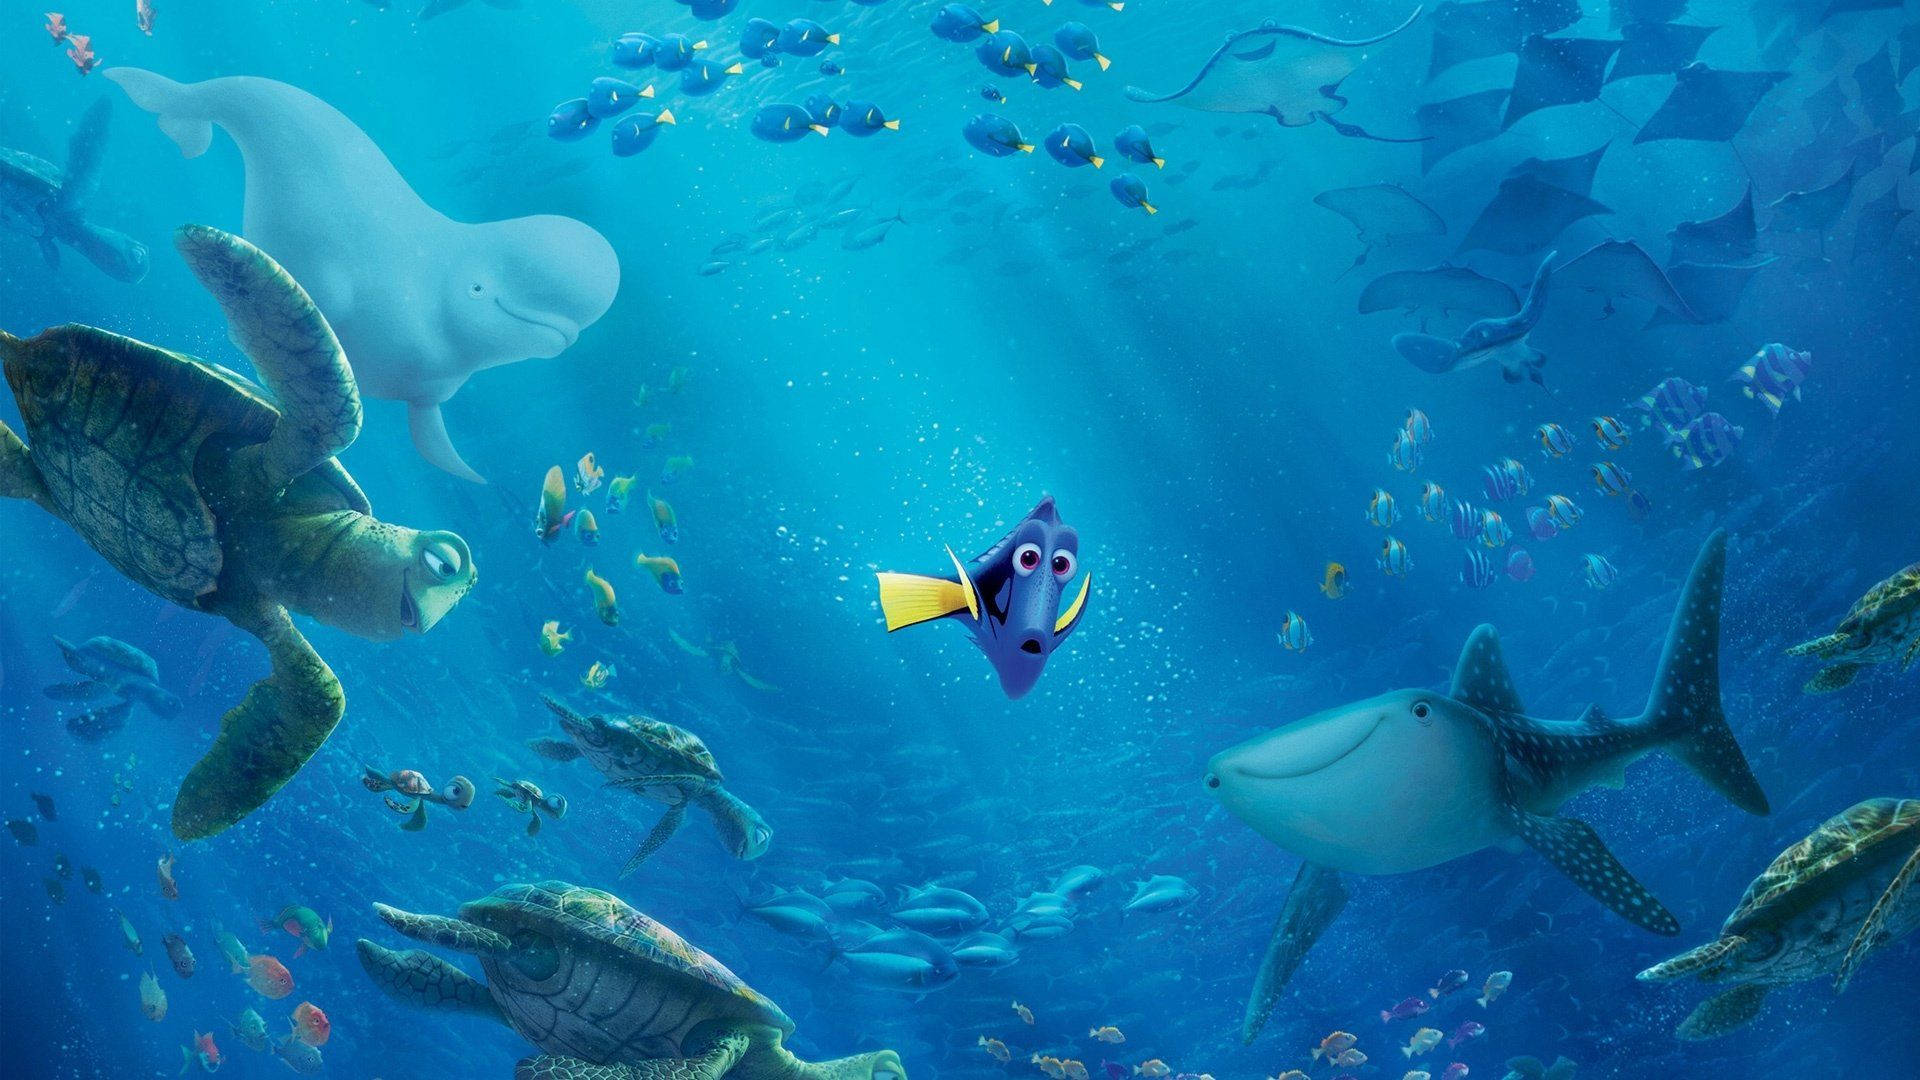 Finding Nemo Dory With Sea Creatures